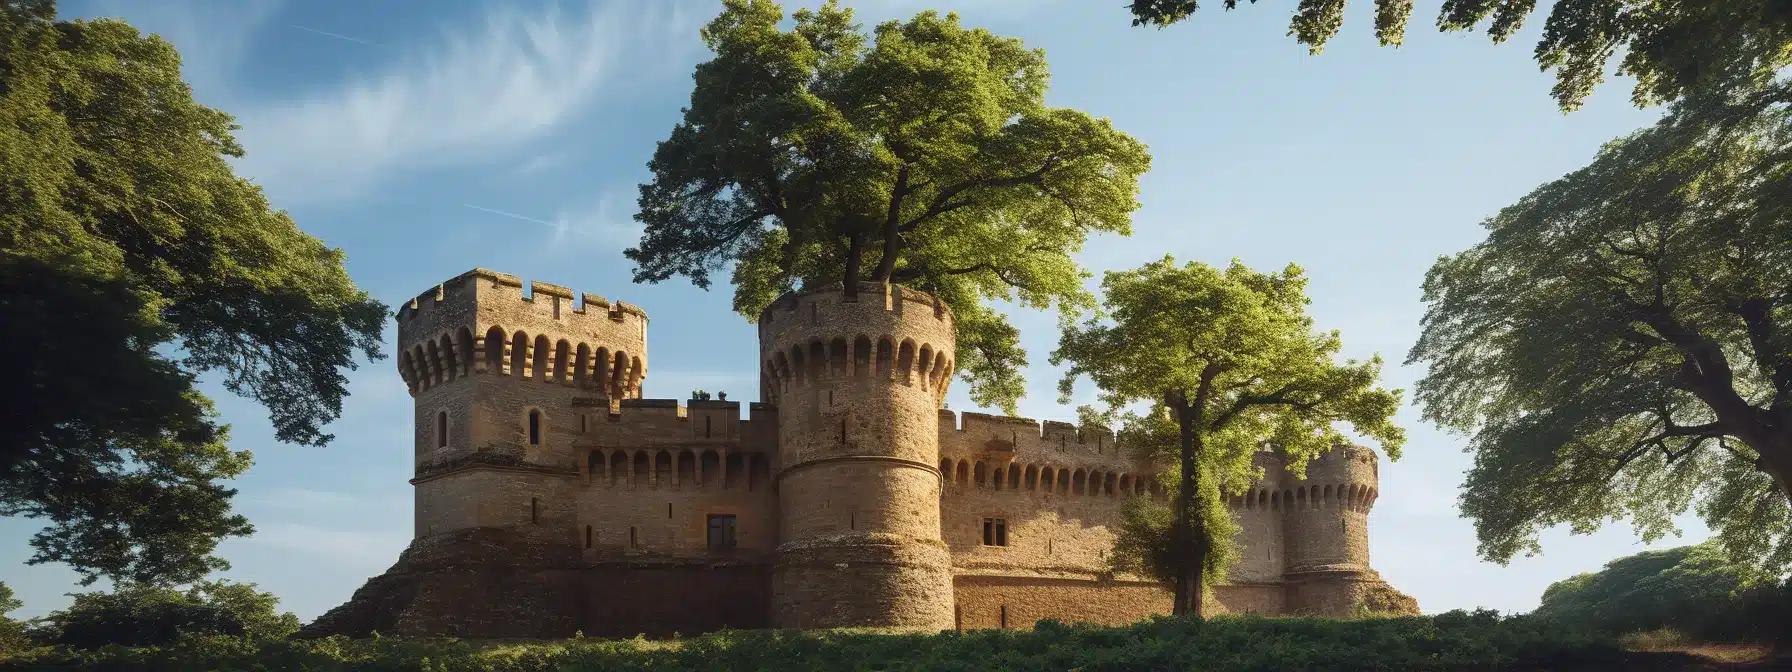 A Towering Castle With A Flourishing Tree Representing A Brand'S Long-Term Impact.